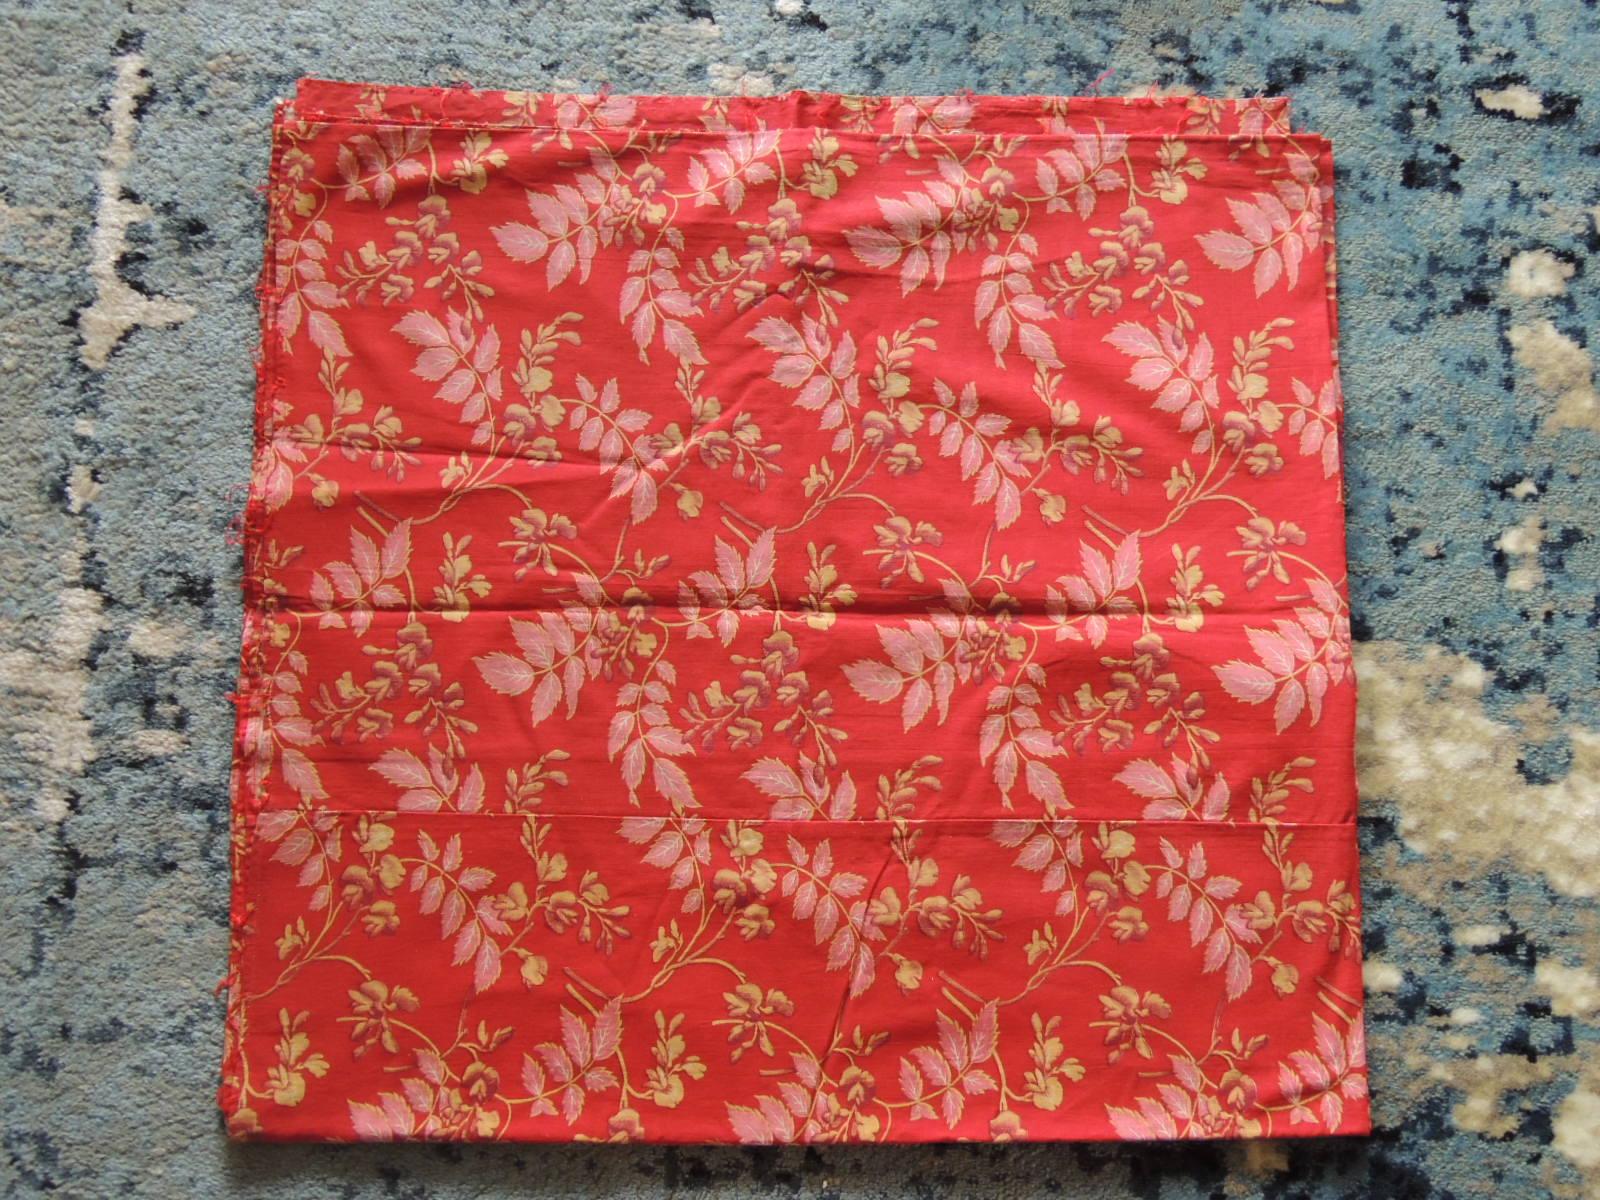 Antique floral large textile panel
In shades of gold, red and pink.
Ideal for pillows. shades, curtains, slipcovers and upholstery.
(Three panels are swon together each one measuring 33